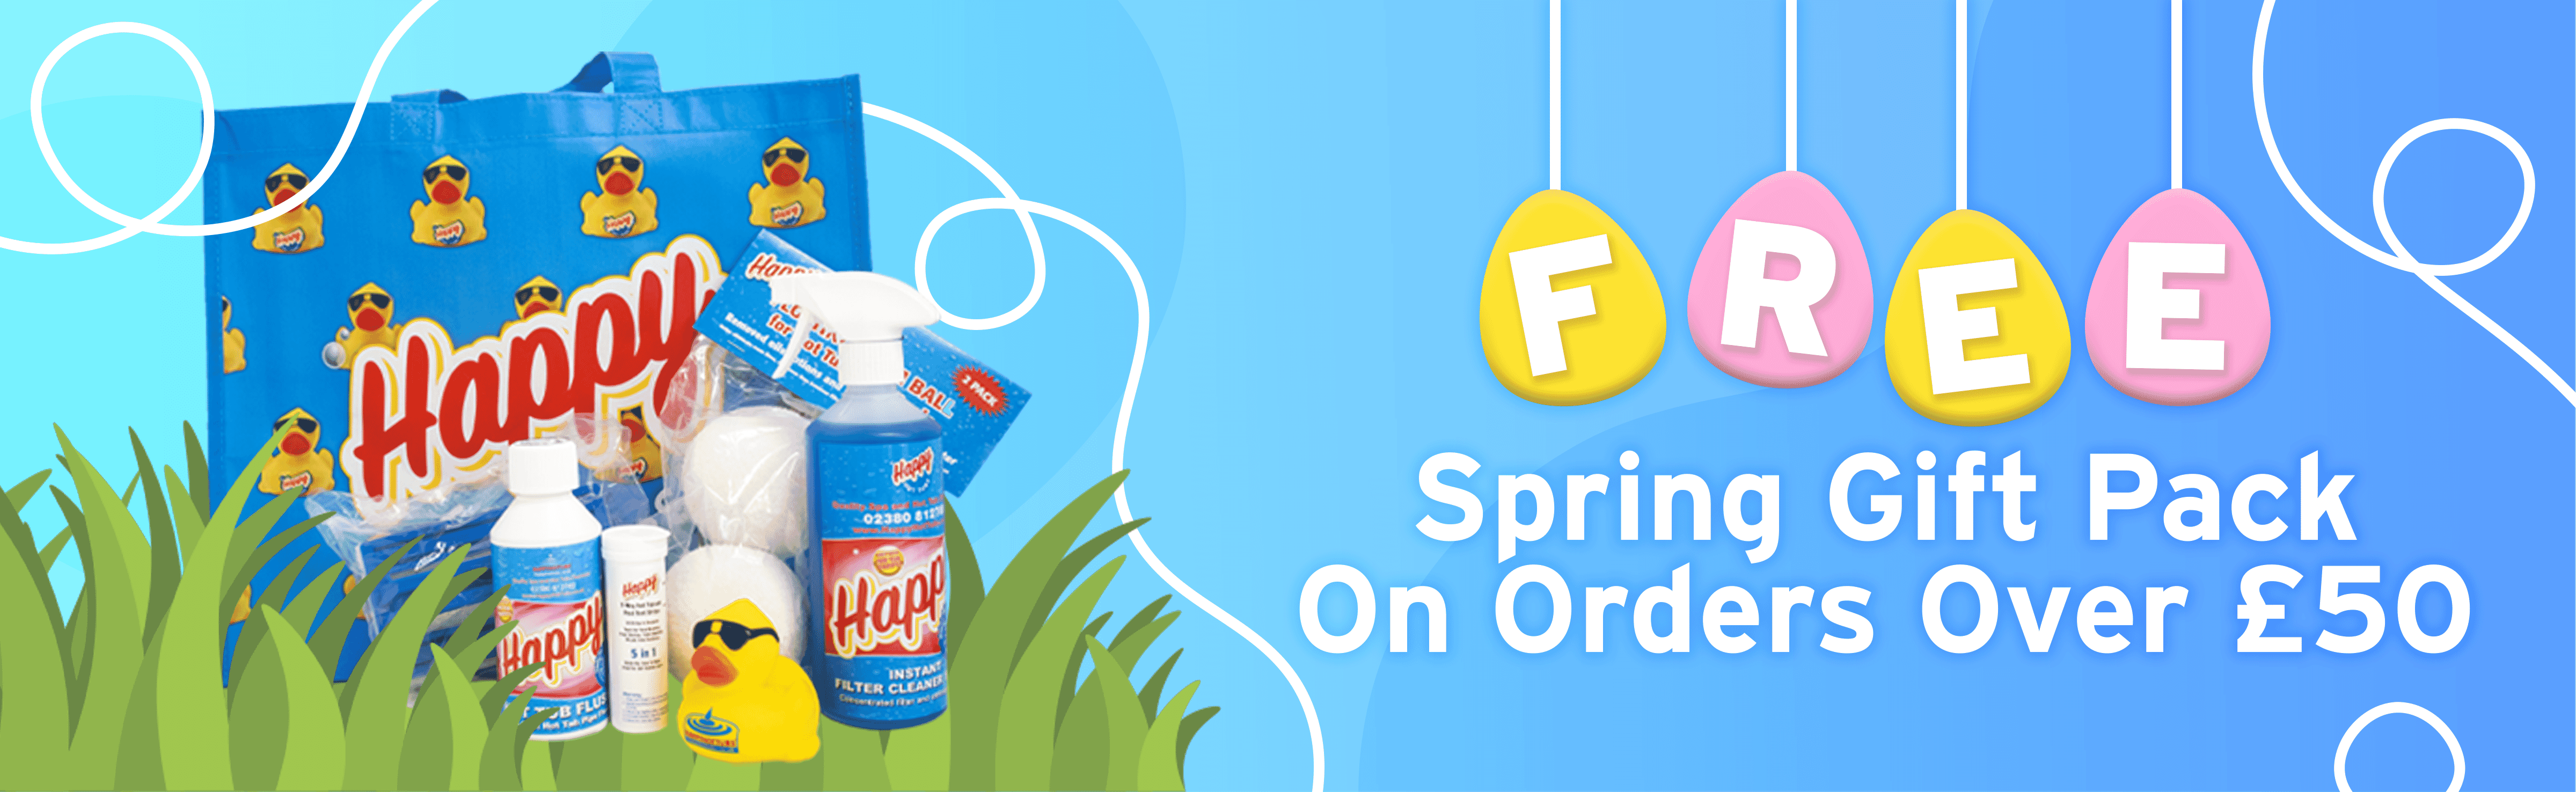 free spring gift pack